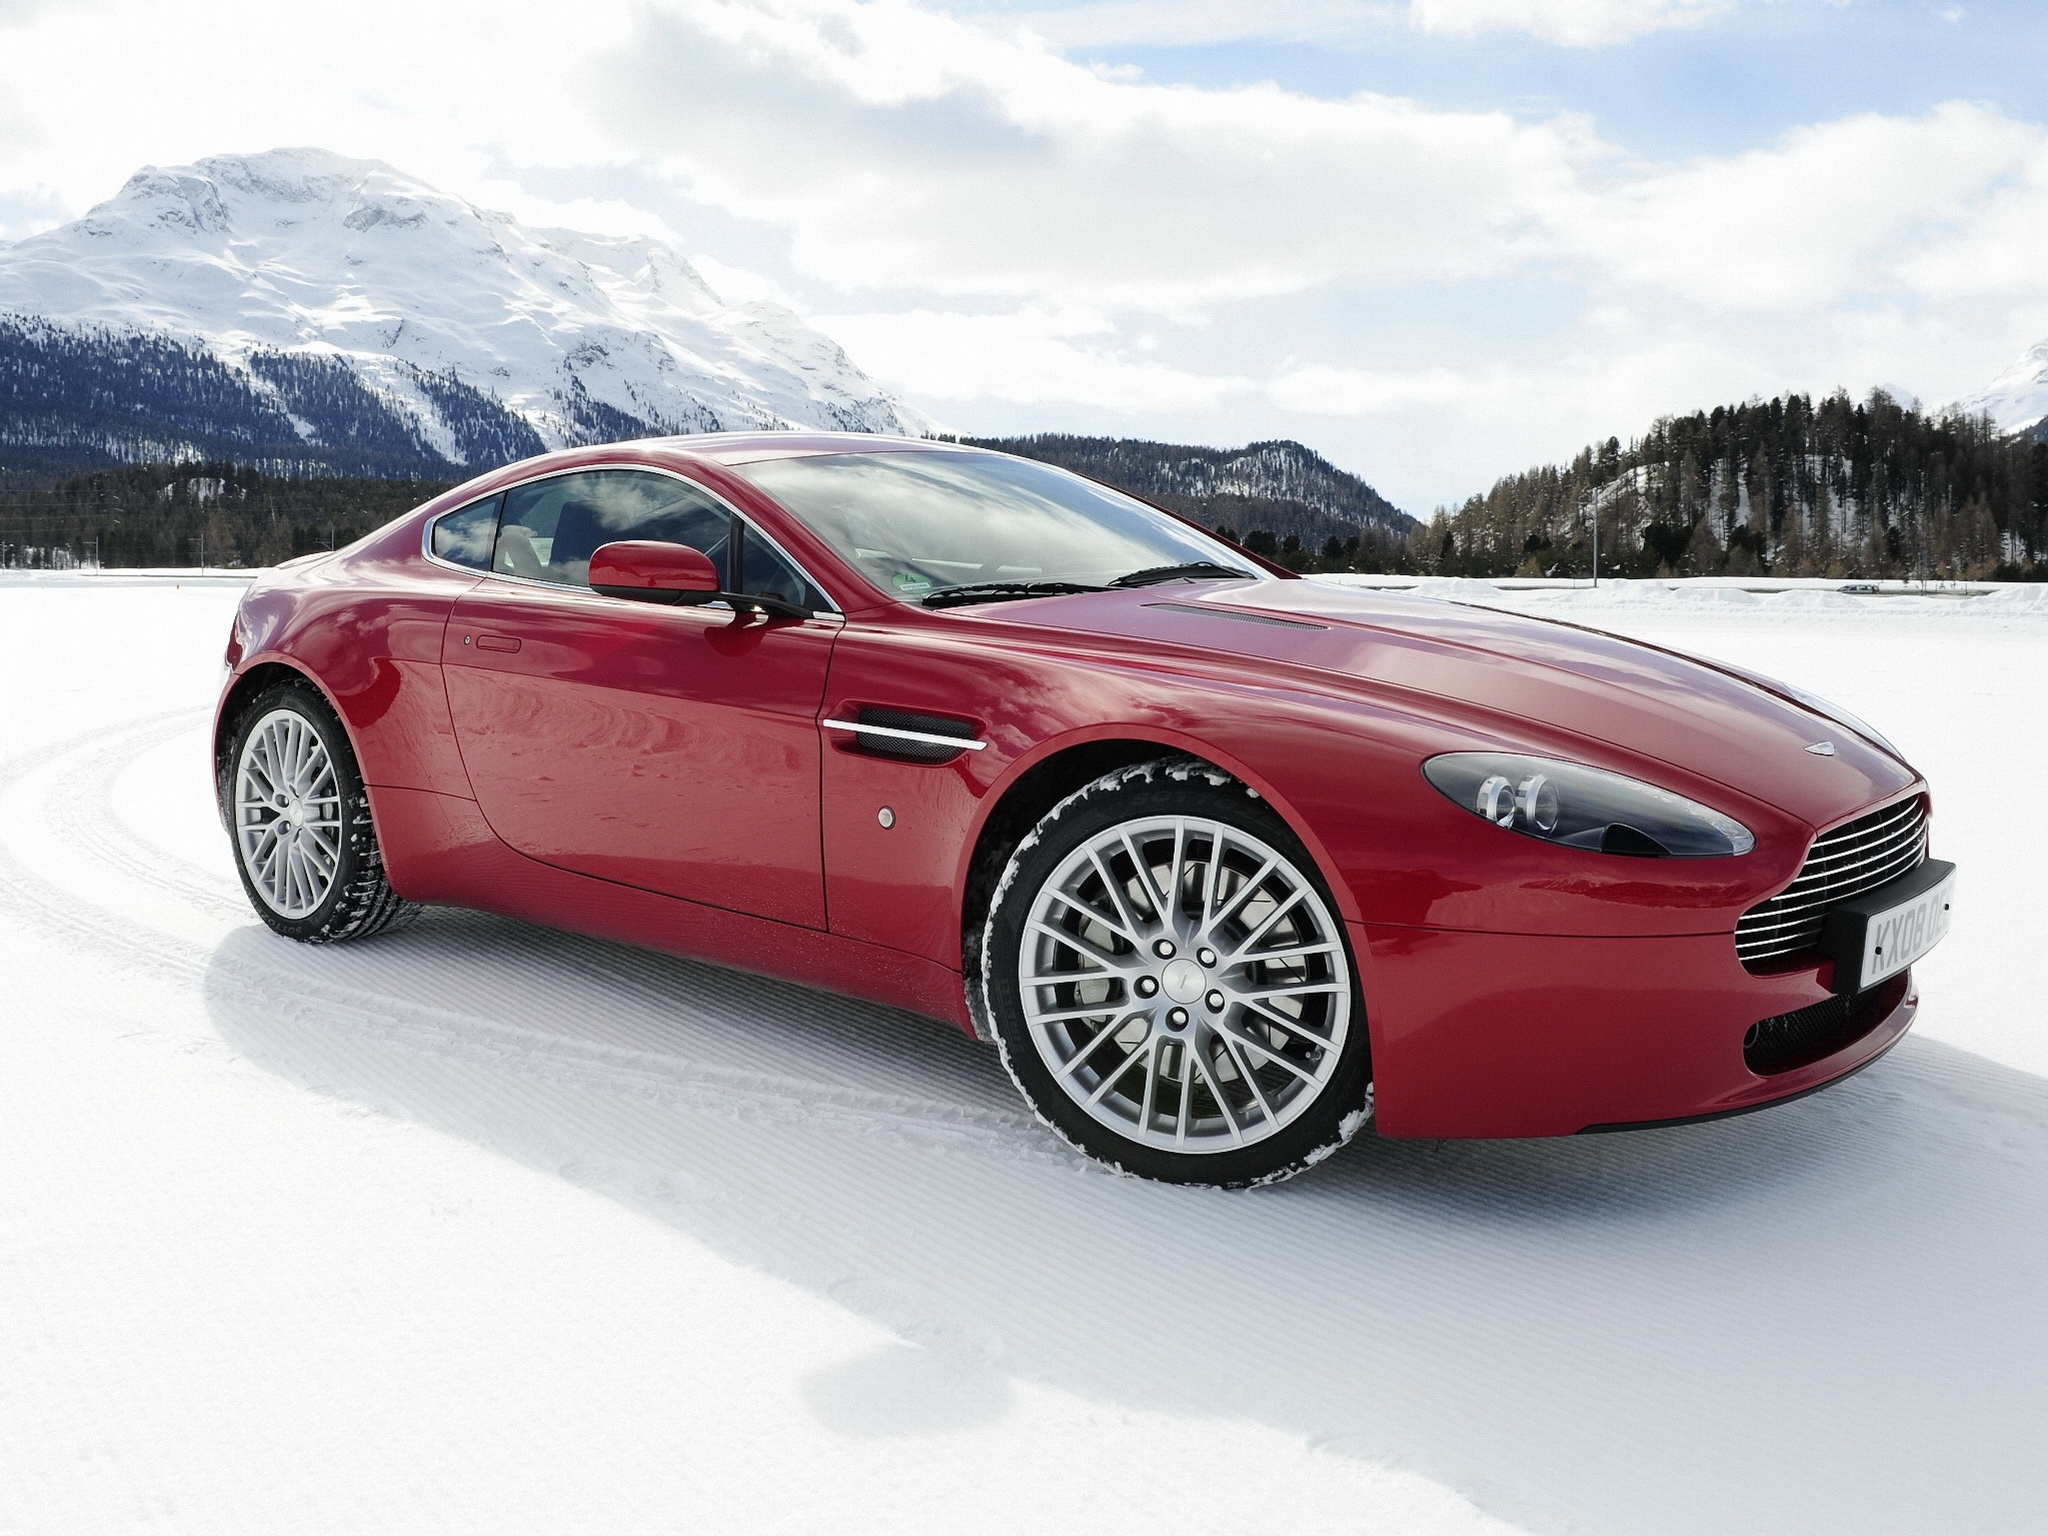 vertical wallpaper auto, mountains, snow, aston martin, cars, red, side view, 2008, v8, vantage